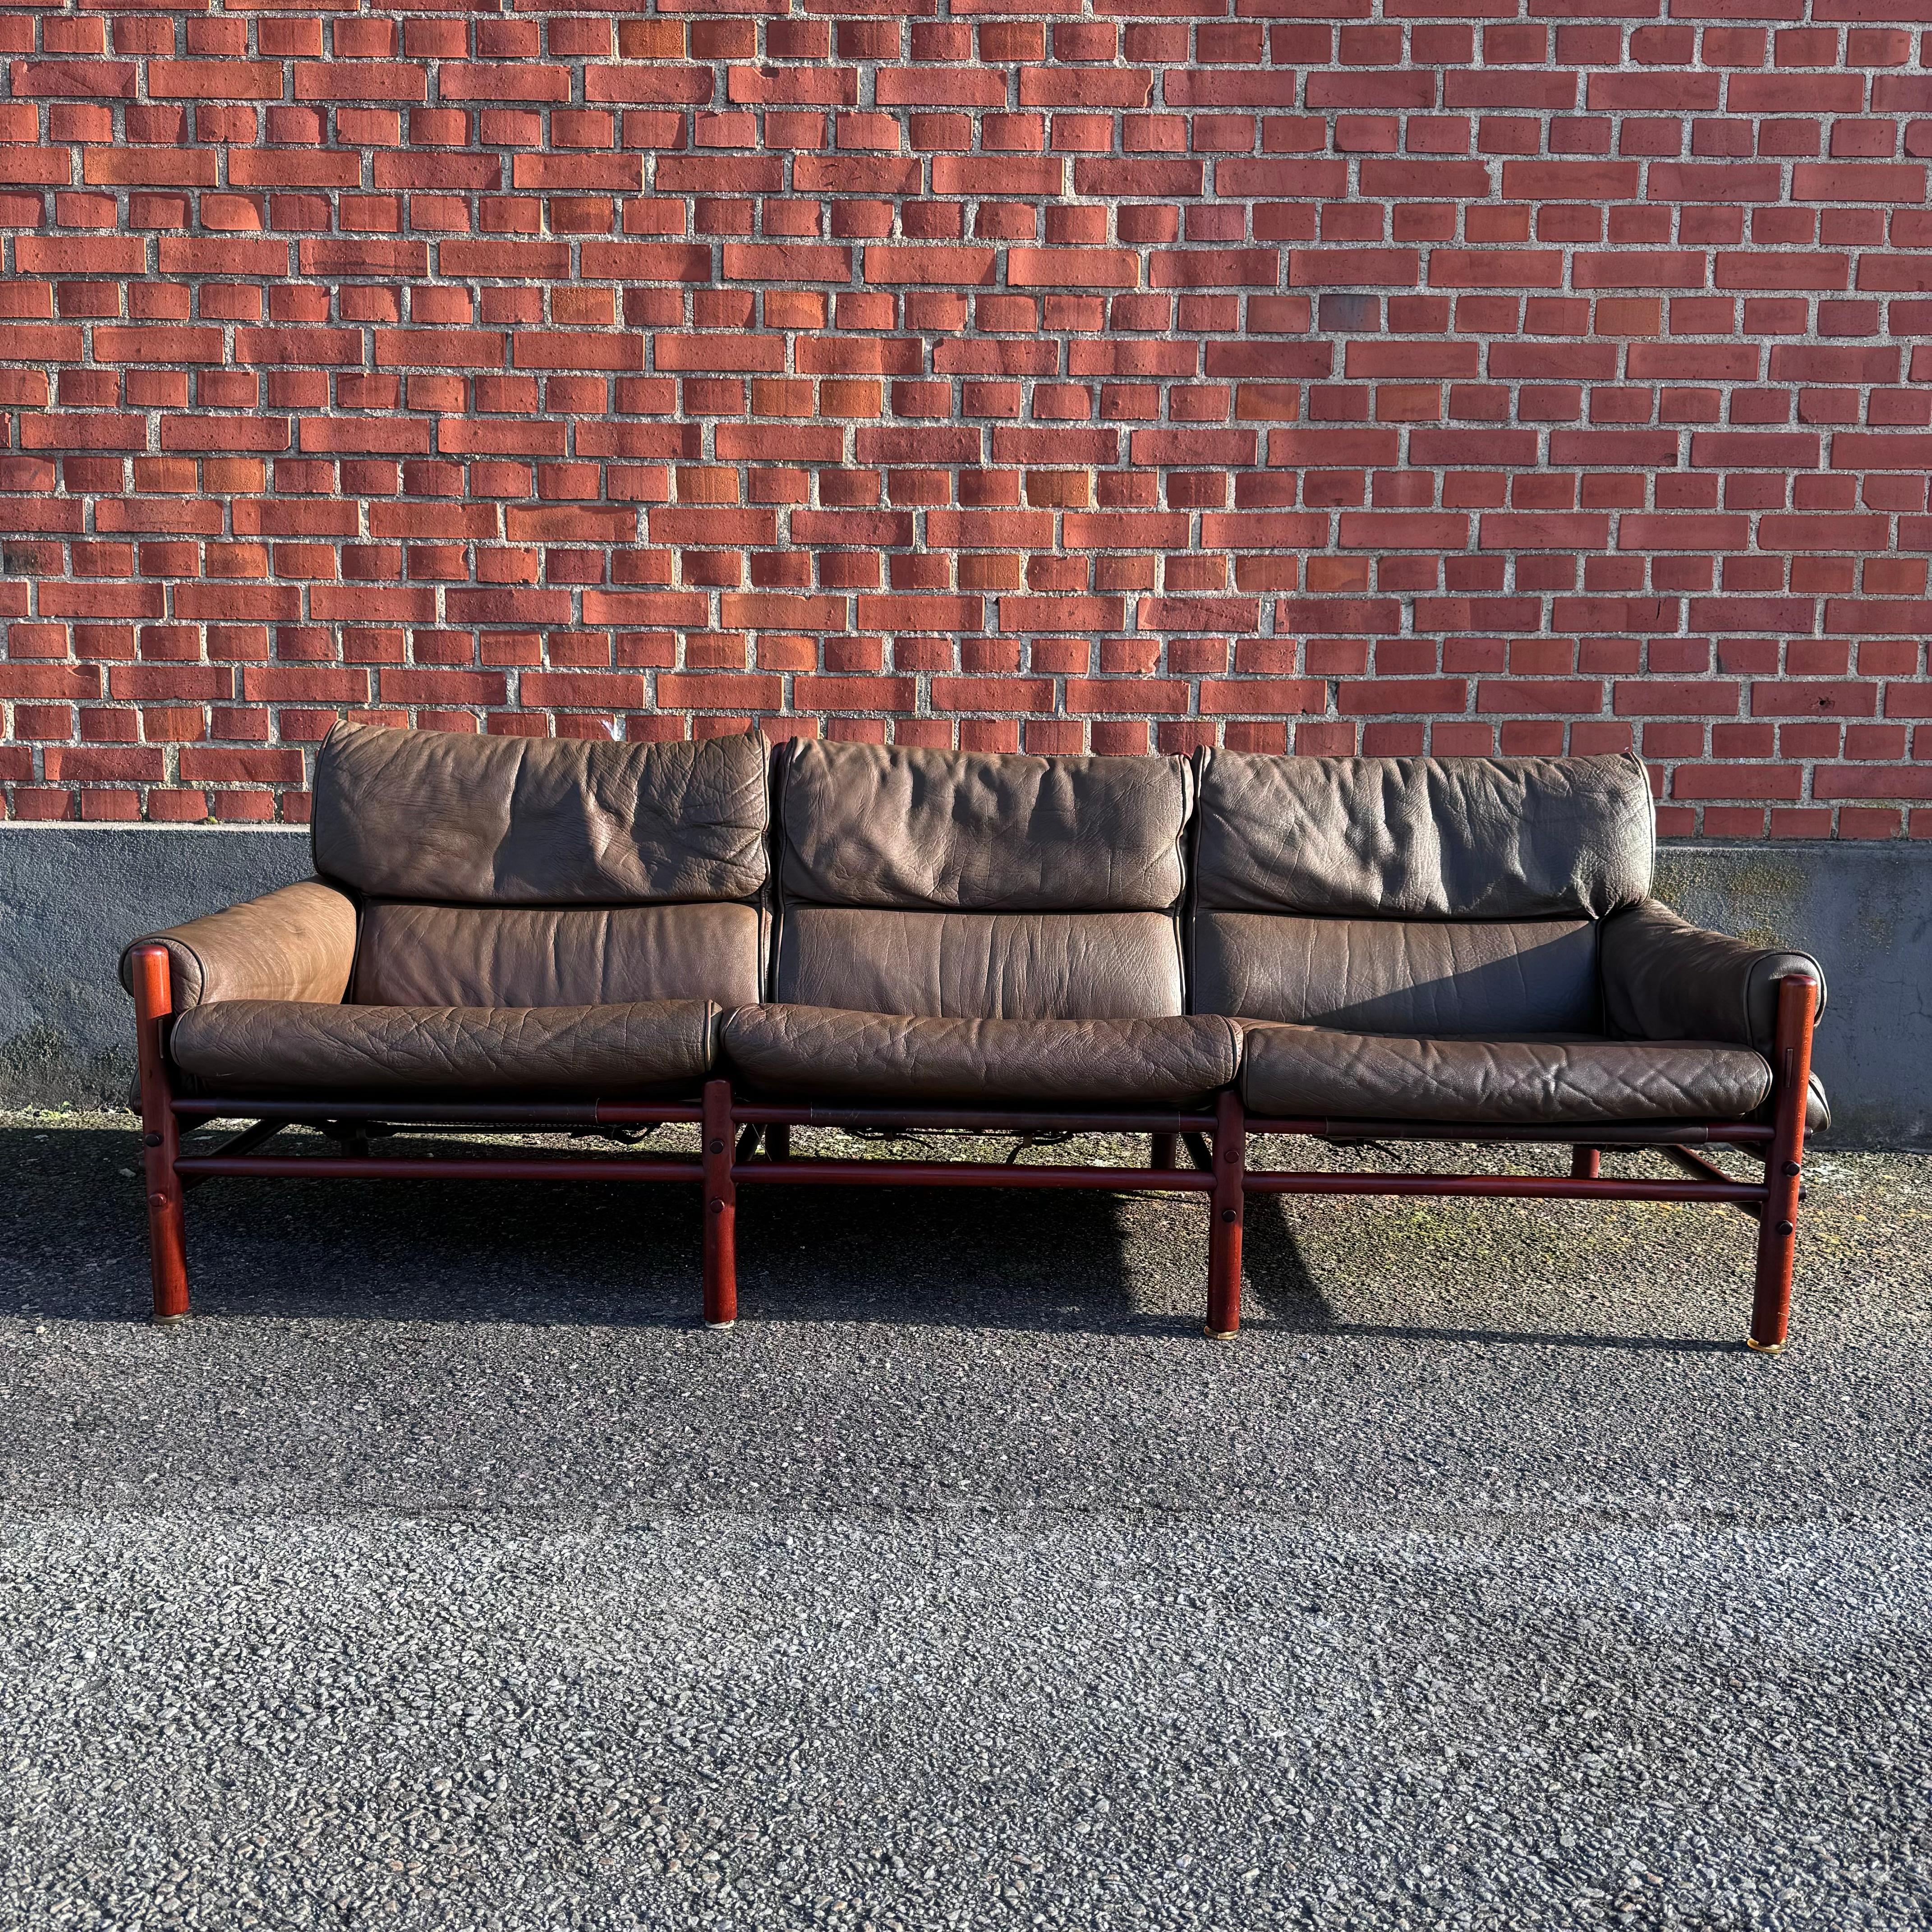 3-seater sofa ”Kontiki” designed by Arne Norell in original buffalo leather. Produced by Arne Norell AB in Aneby, Sweden. 